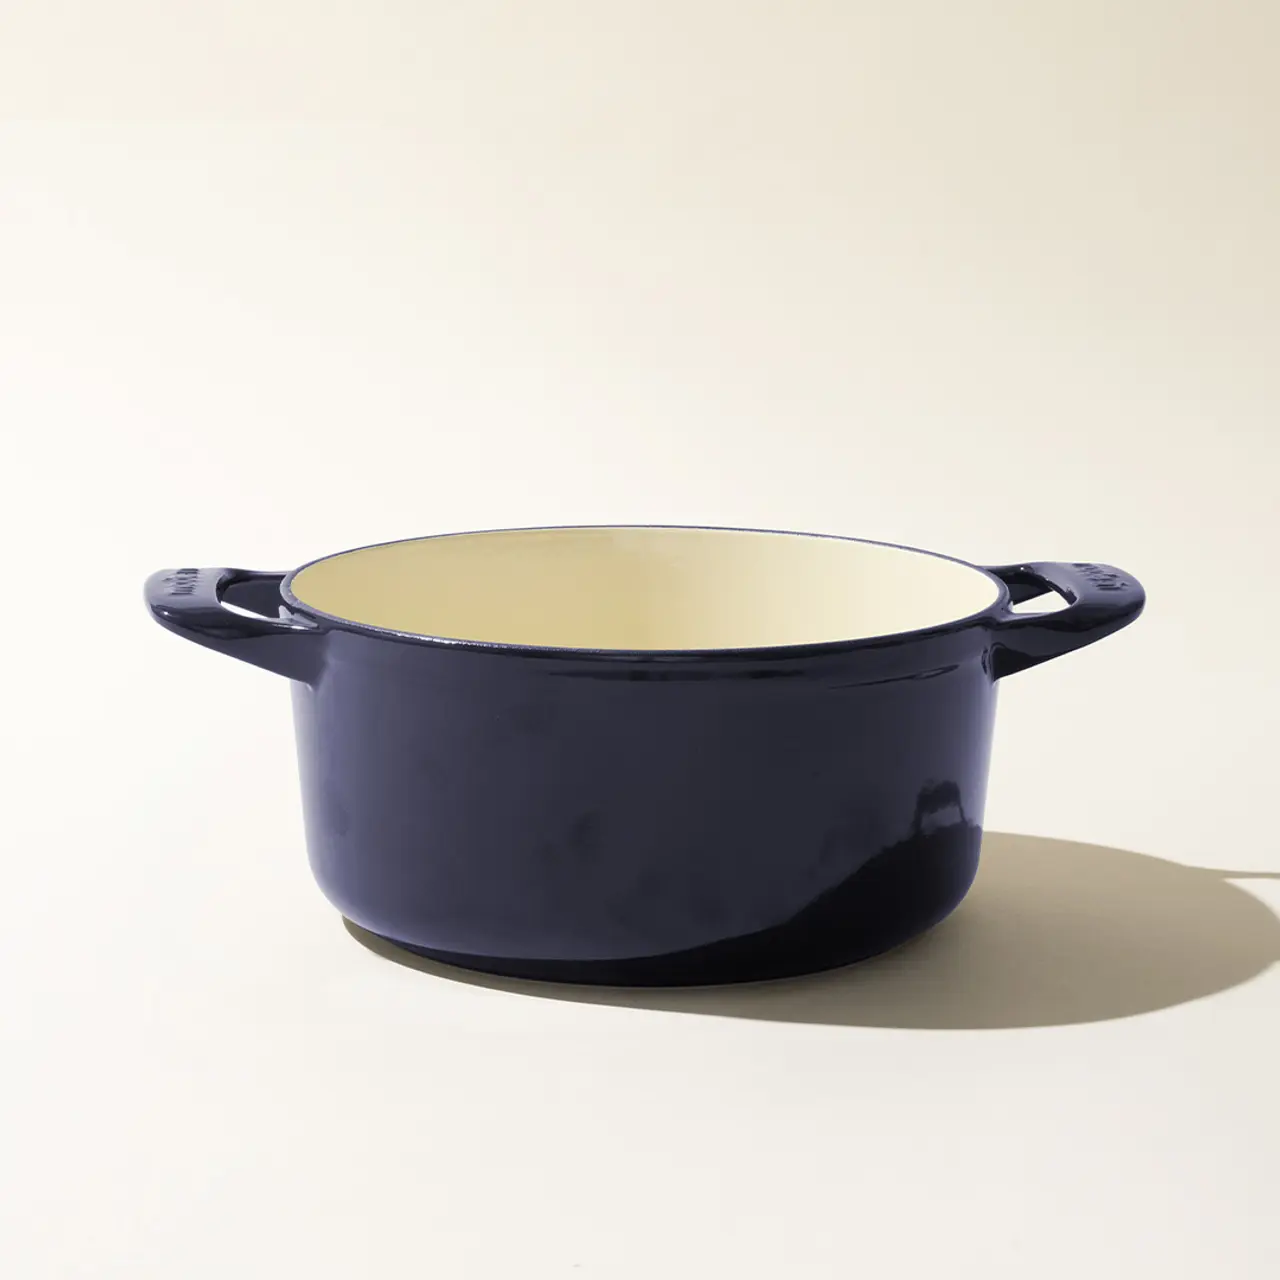 A simple navy blue enameled cast iron Dutch oven with handles, shown in profile on a light background.